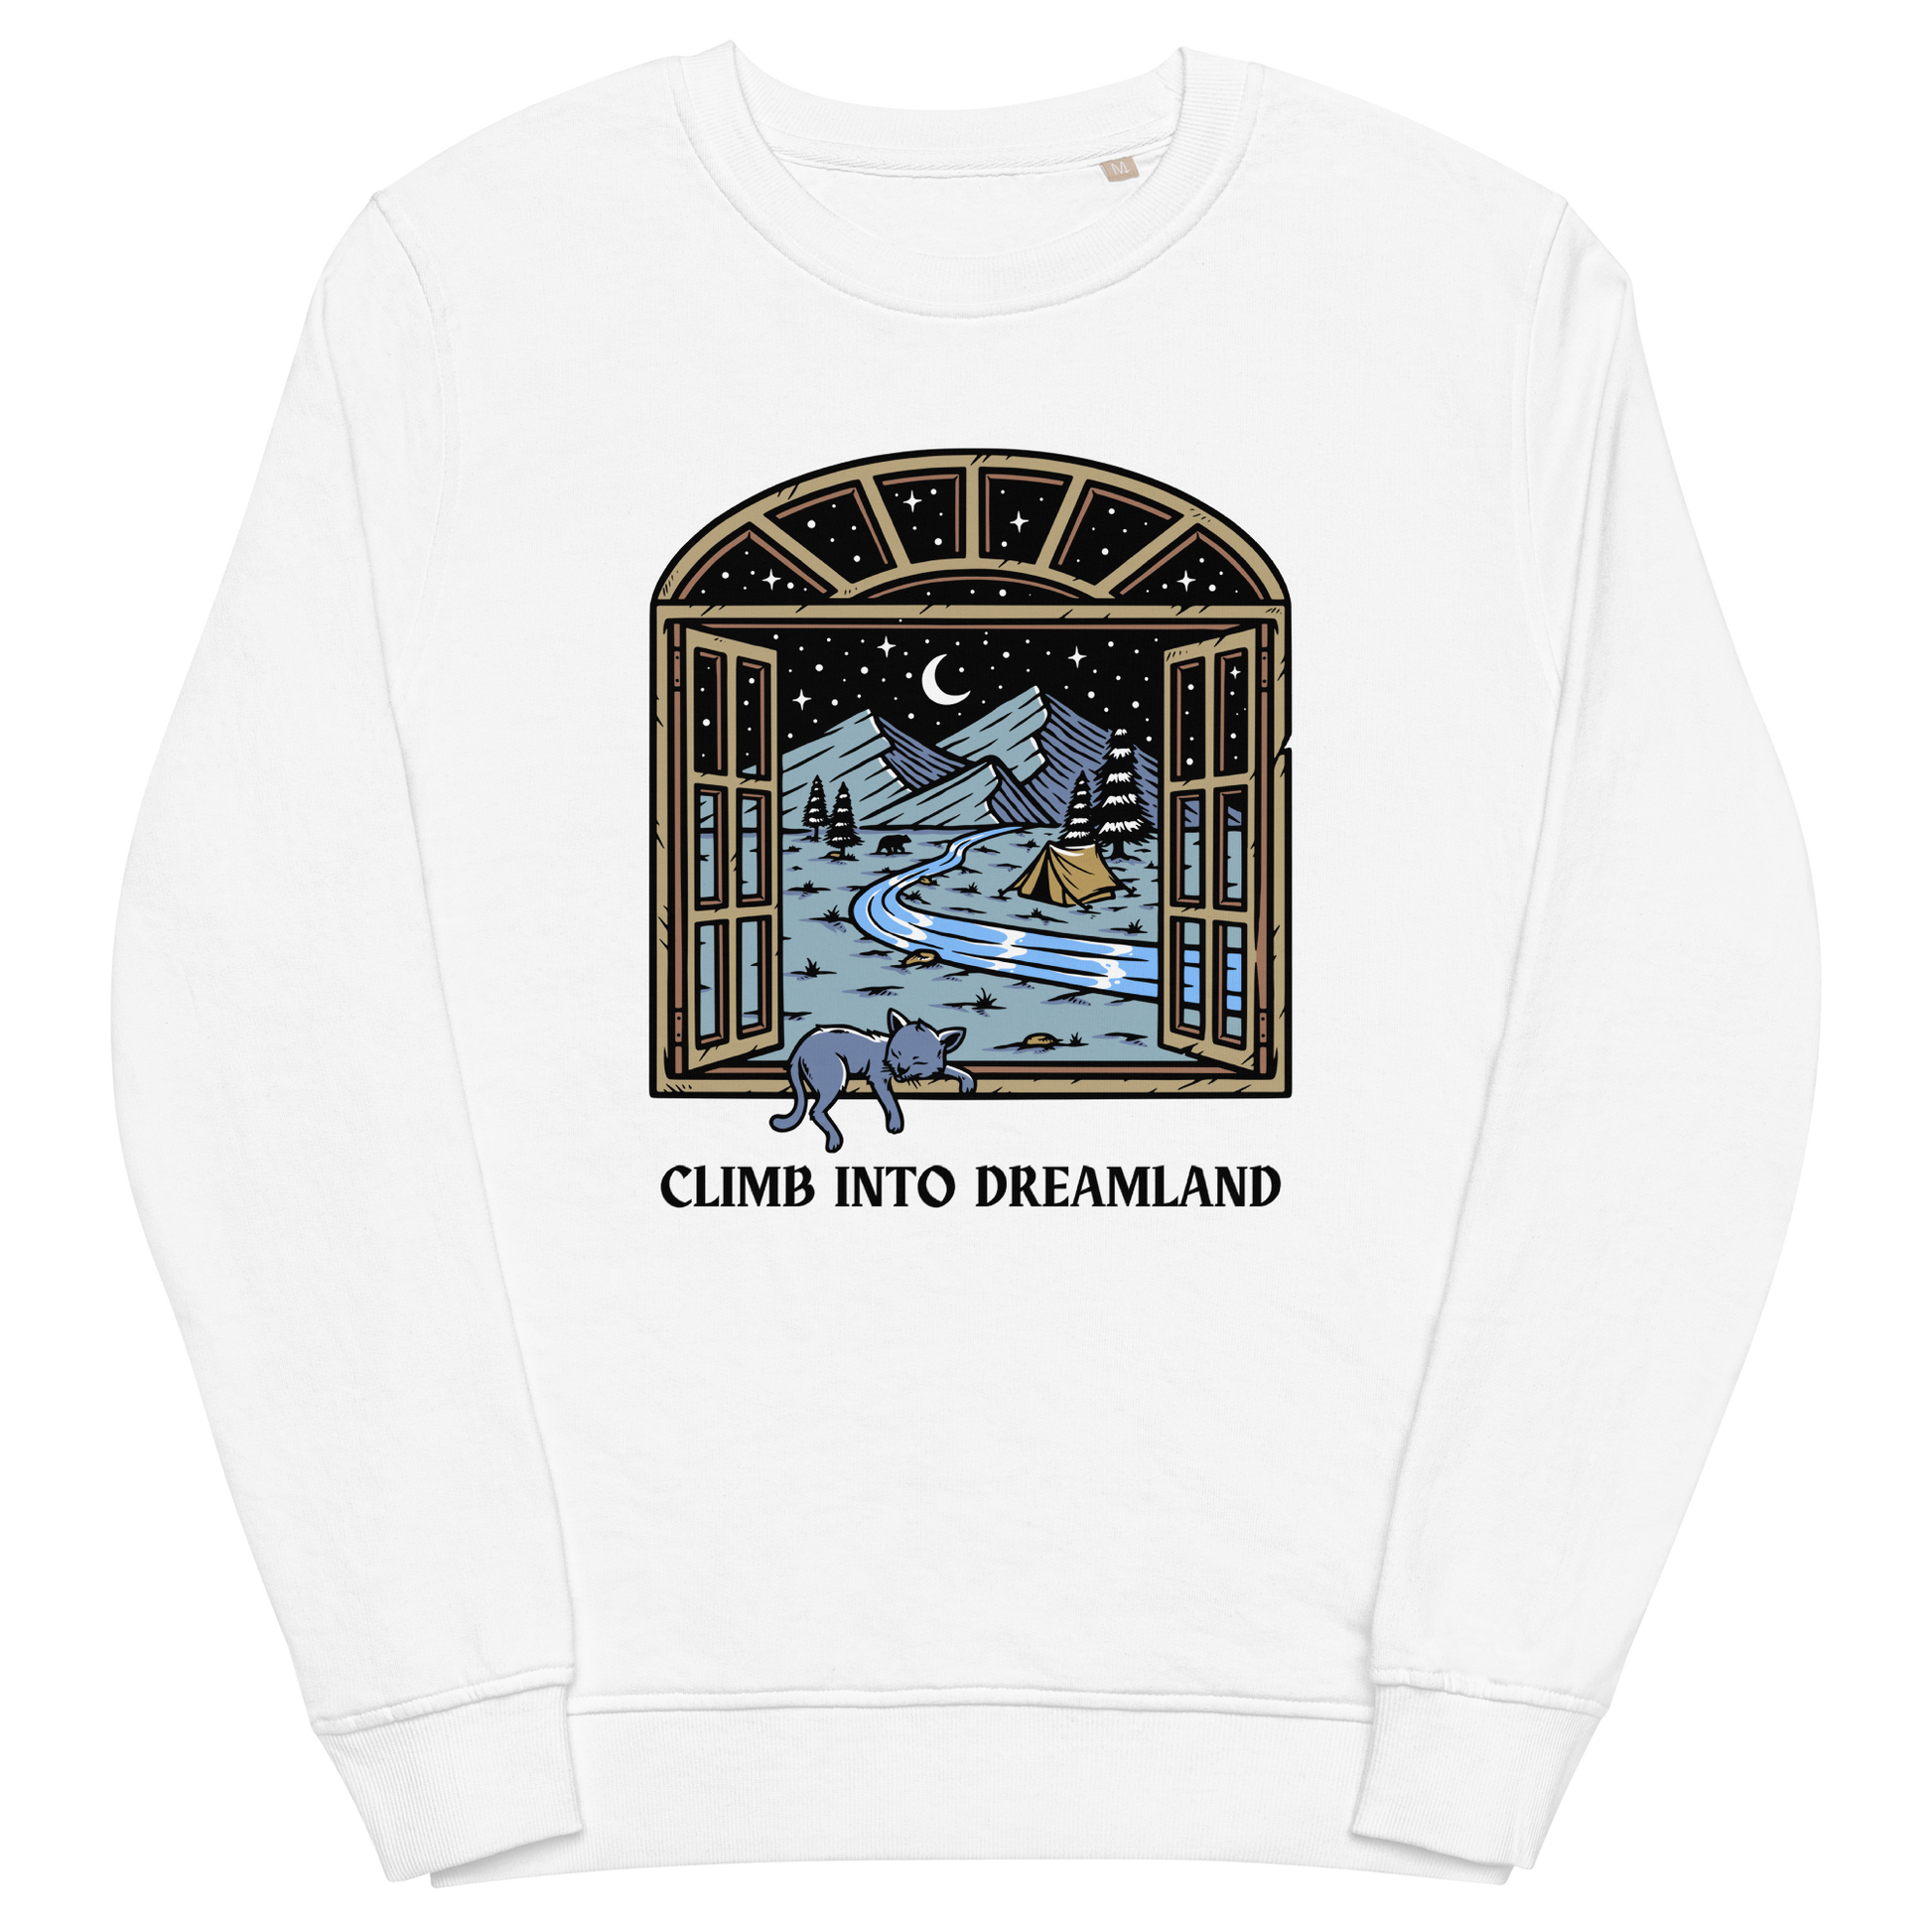 White Organic Cotton Climb Into Dreamland Sweatshirt featuring a mesmerizing mountain view graphic on the chest - Cool Graphic Nature Sweatshirts - Boozy Fox